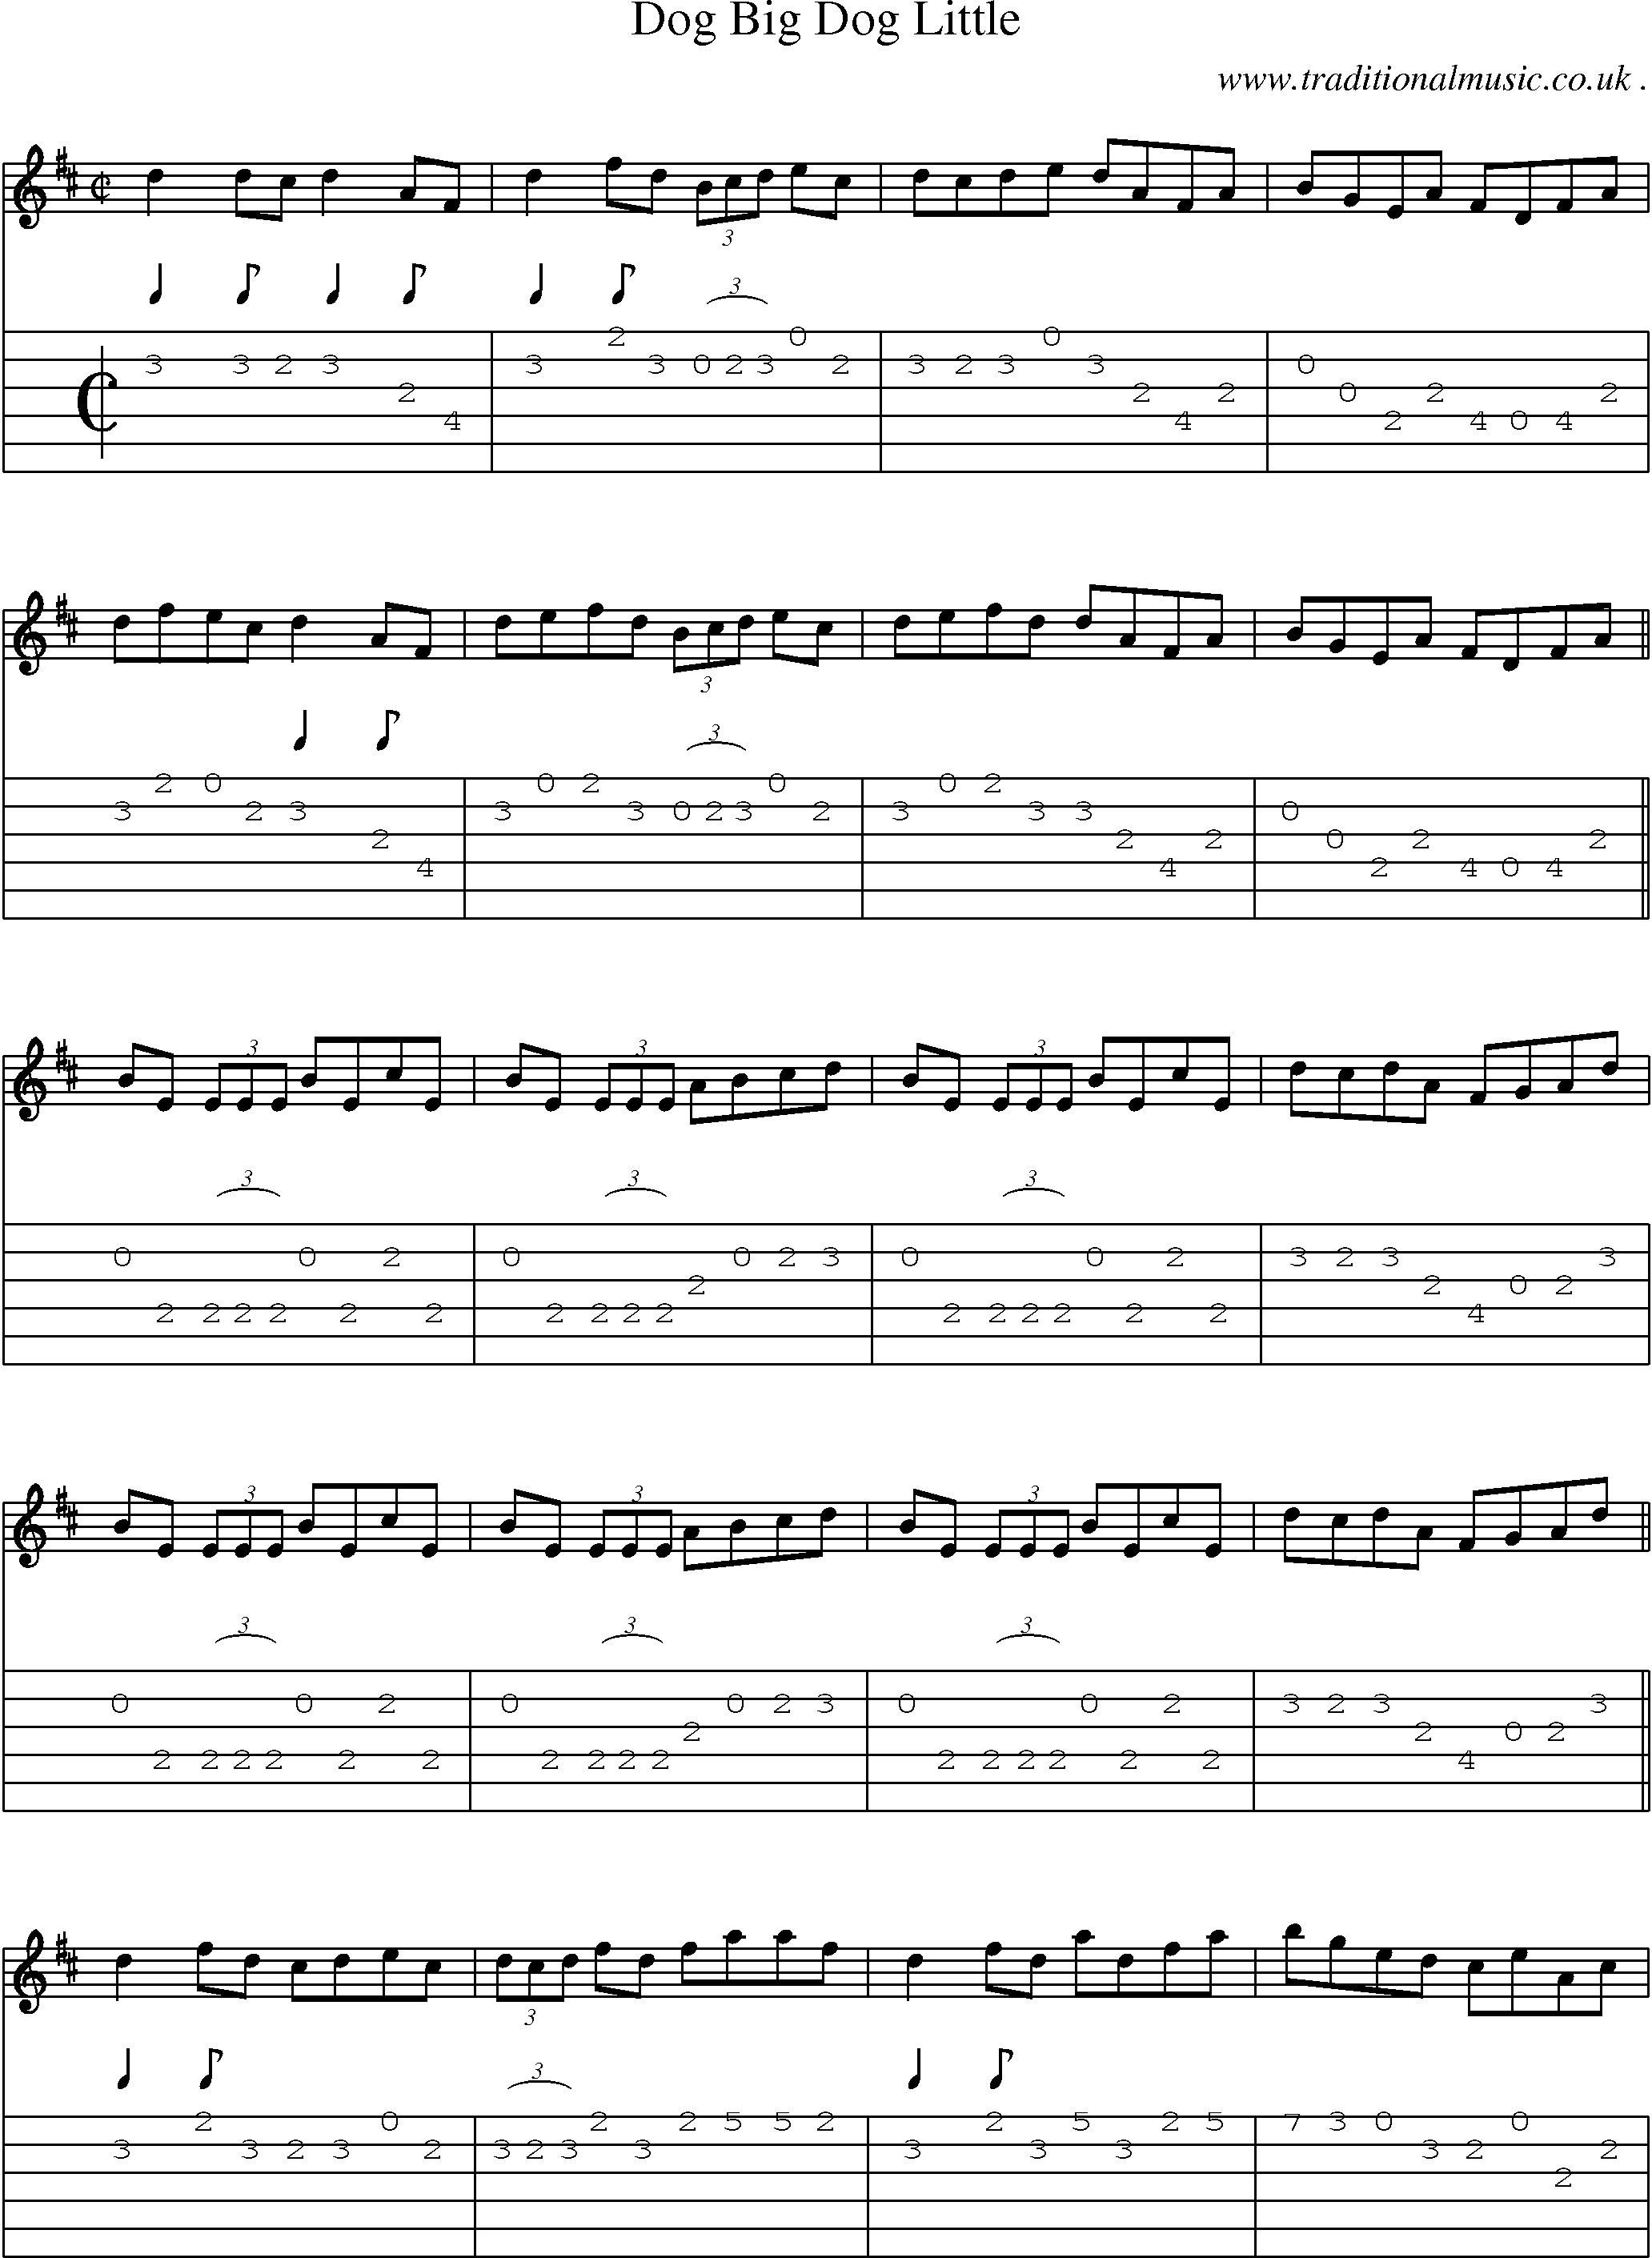 Sheet-Music and Guitar Tabs for Dog Big Dog Little